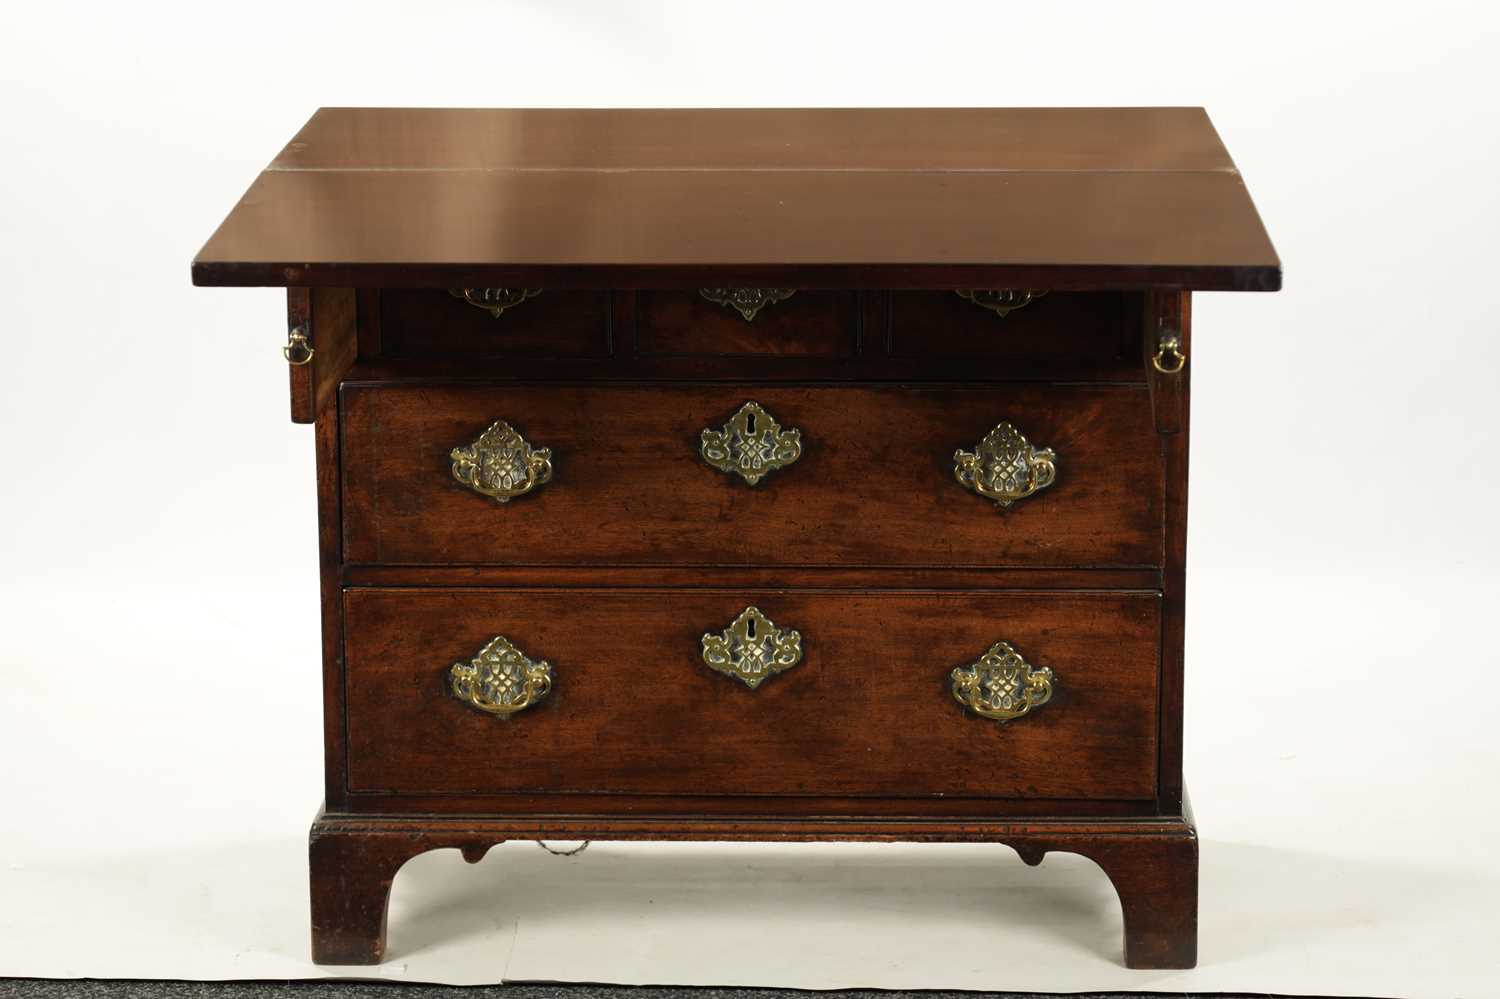 AN EARLY 18TH CENTURY WALNUT BACHELORS CHEST - Image 4 of 8